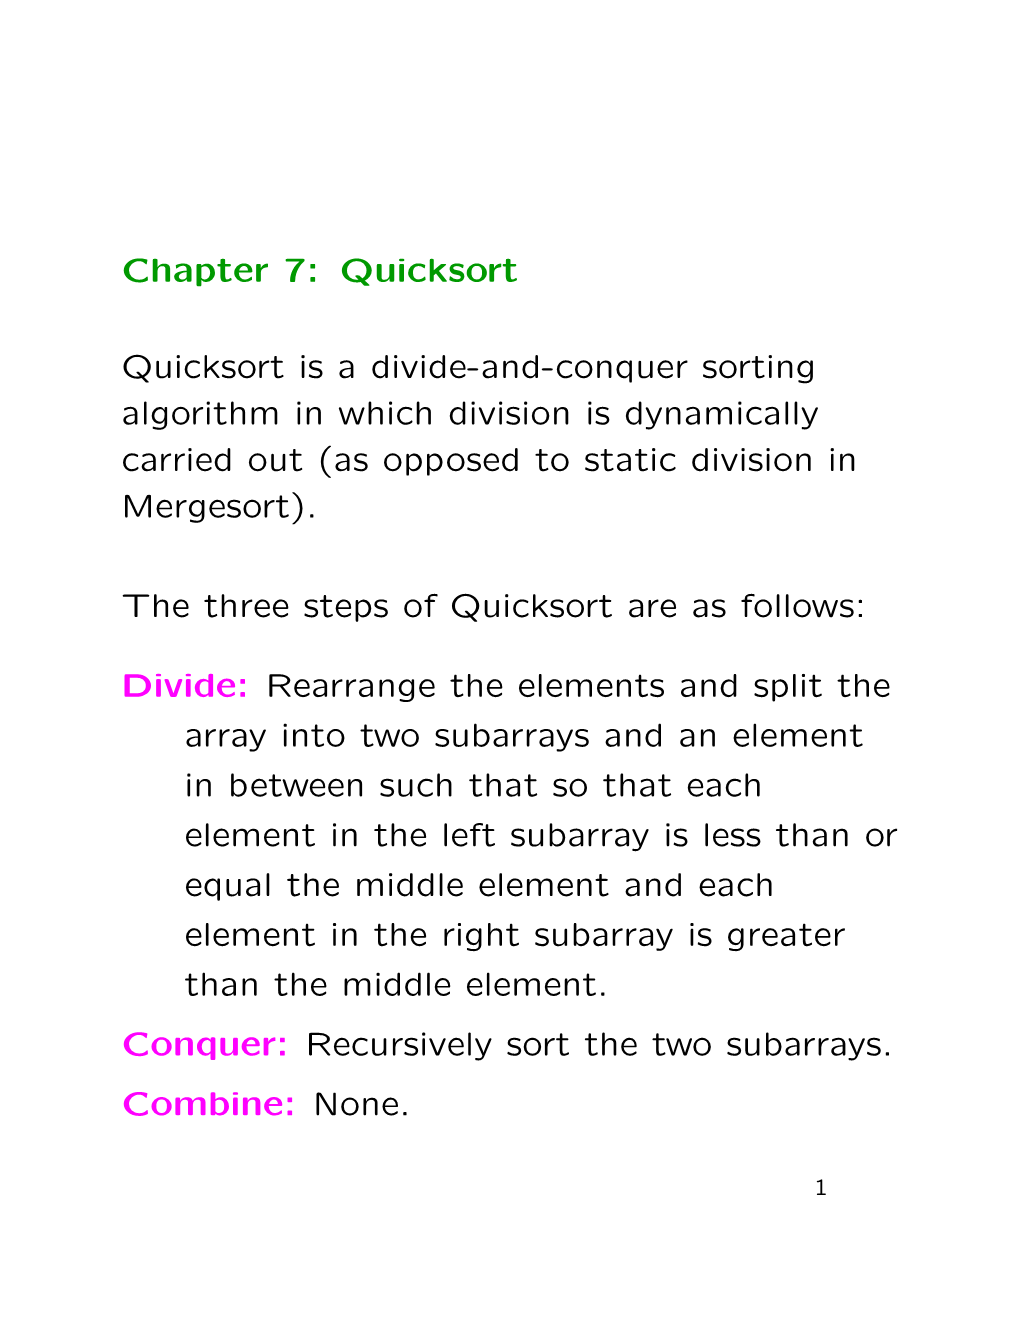 Chapter 7: Quicksort Quicksort Is a Divide-And-Conquer Sorting